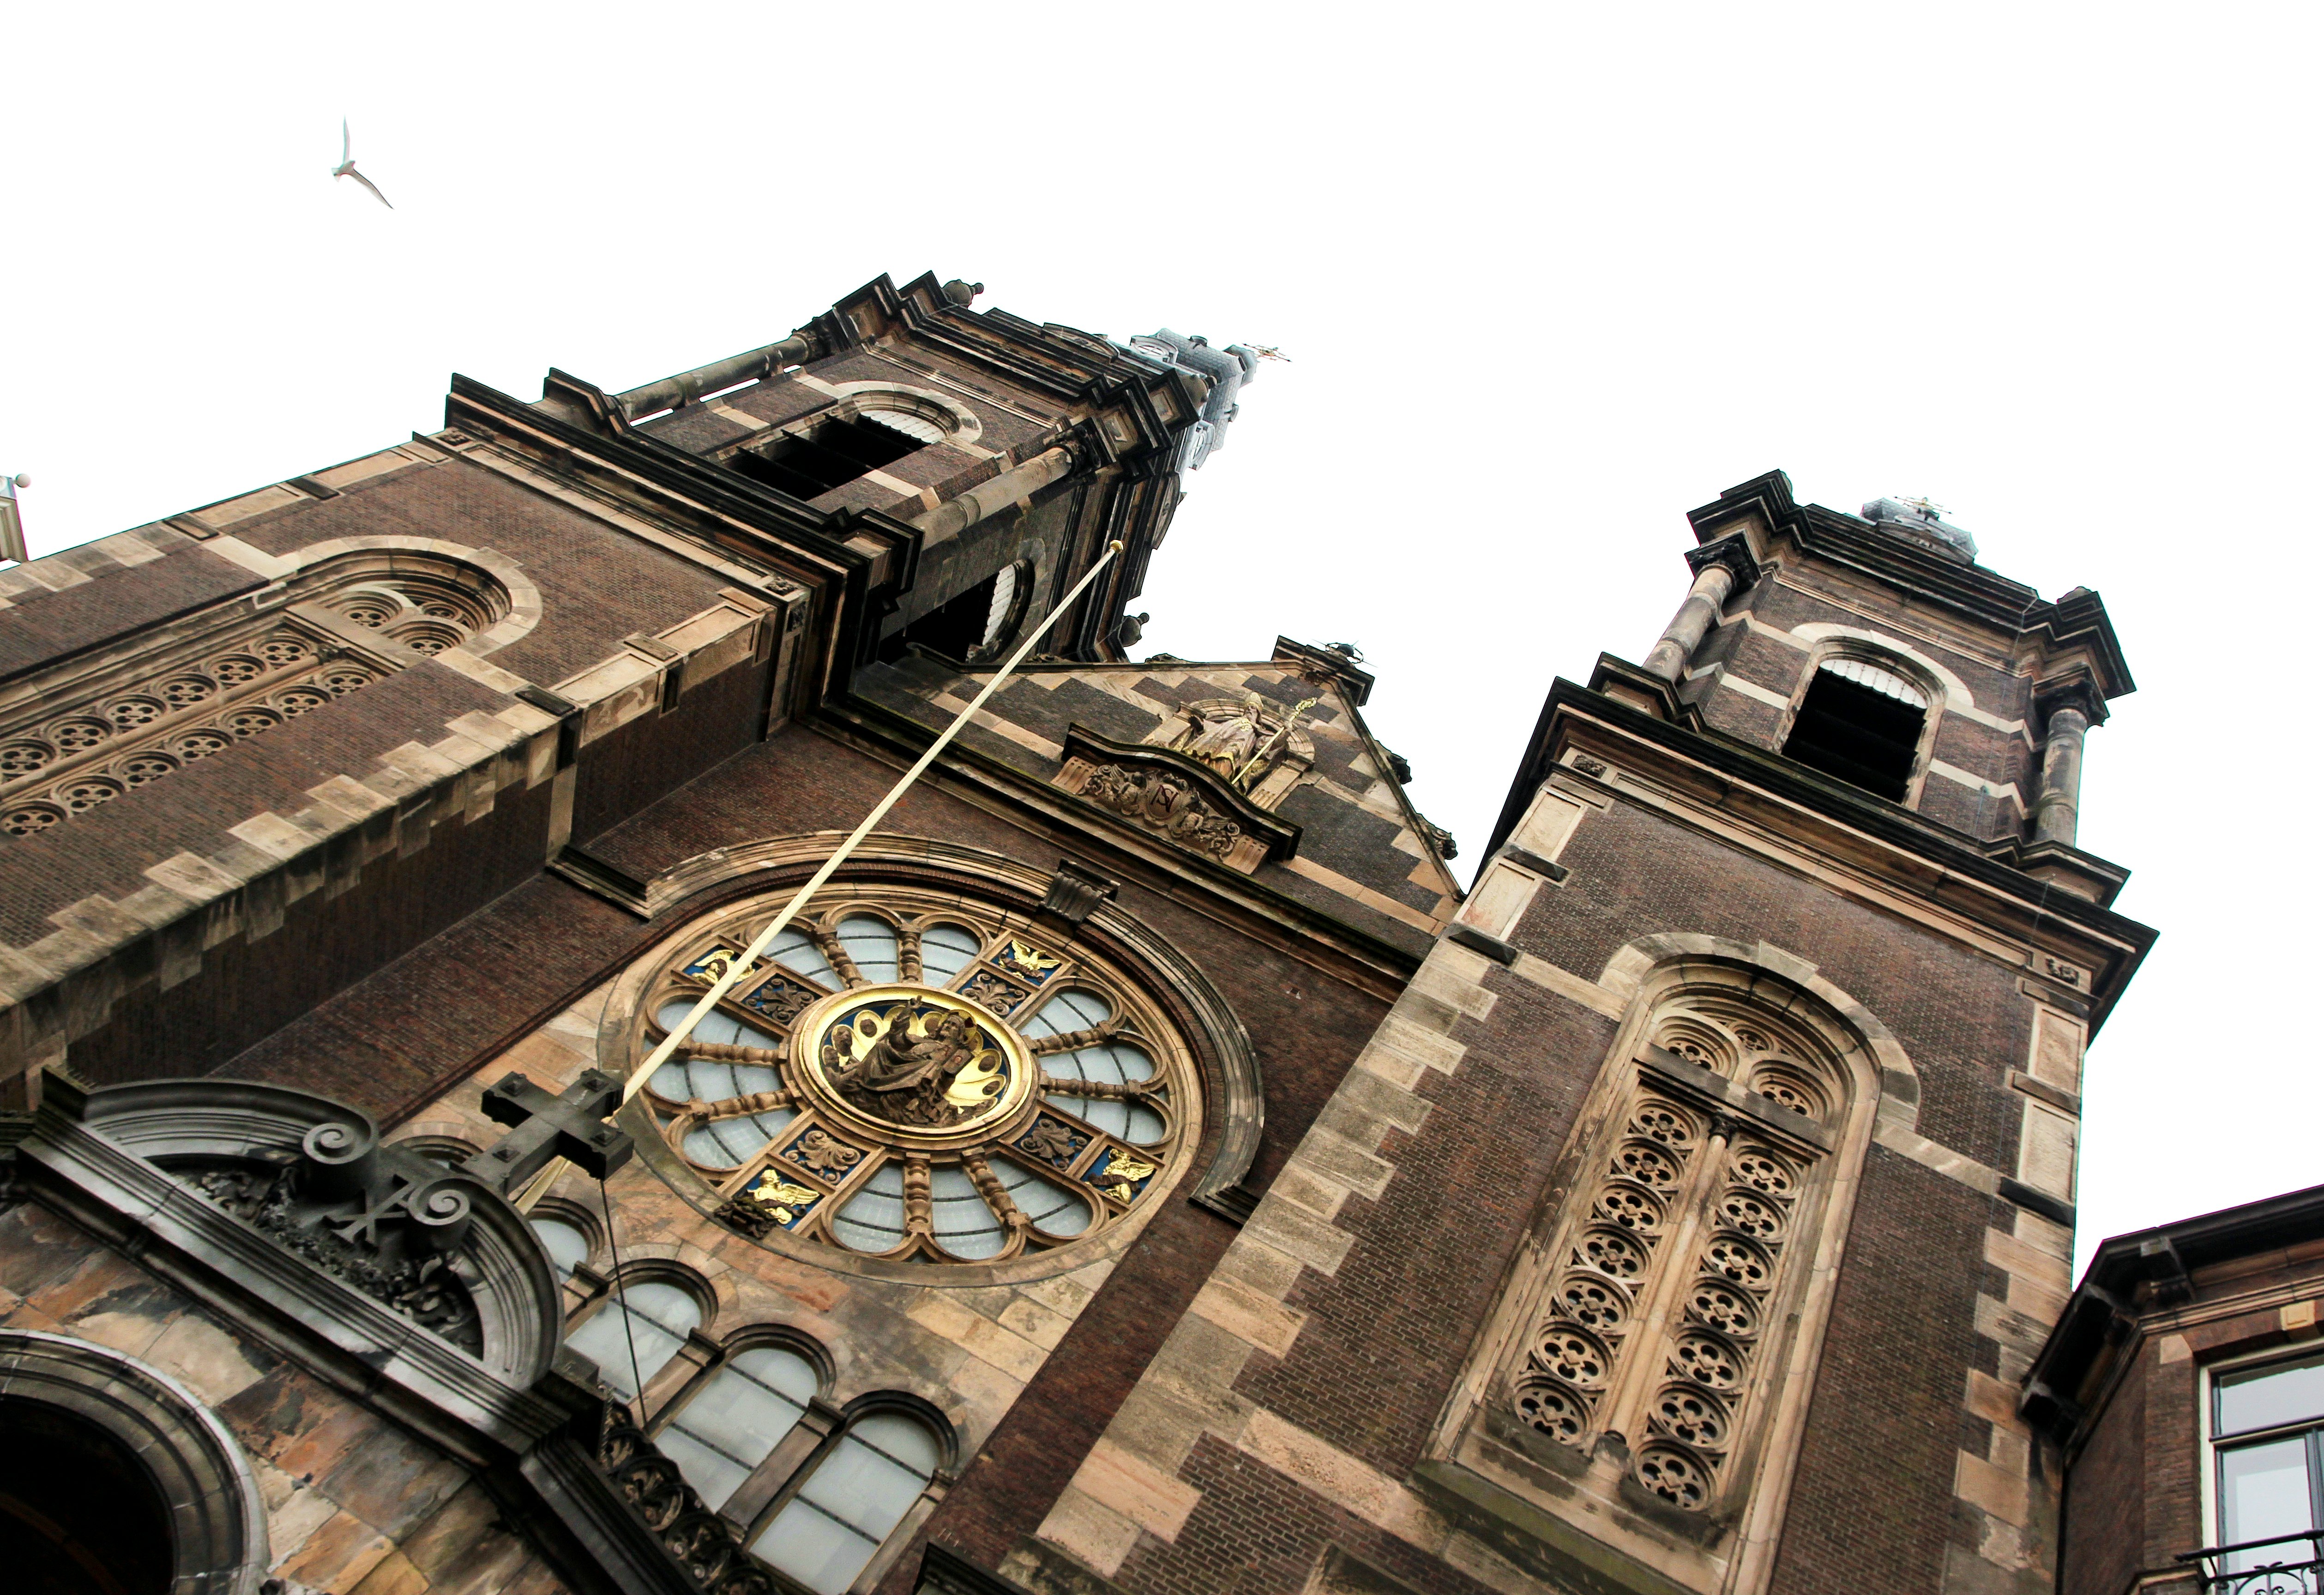 A look up at the Basilica of St. Nicholas in Amsterdam.